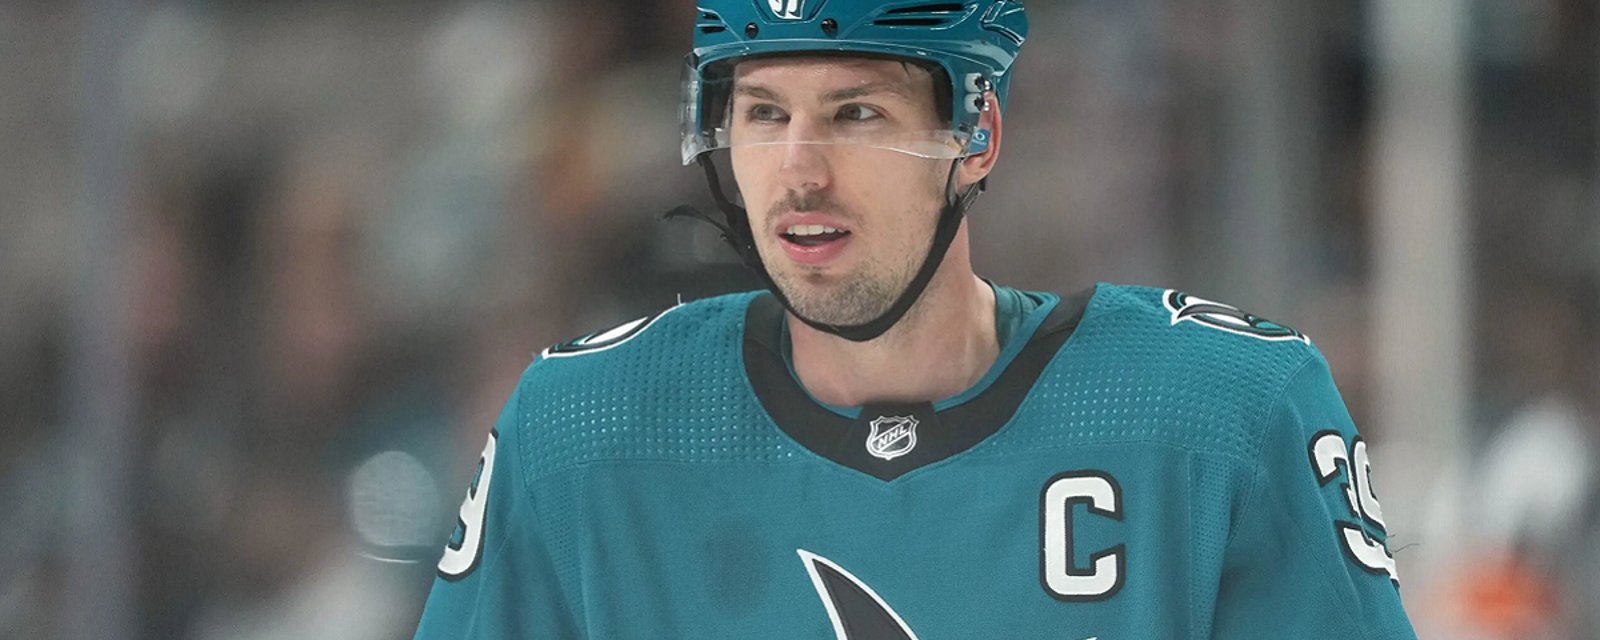 Dire update from Sharks captain Logan Couture.